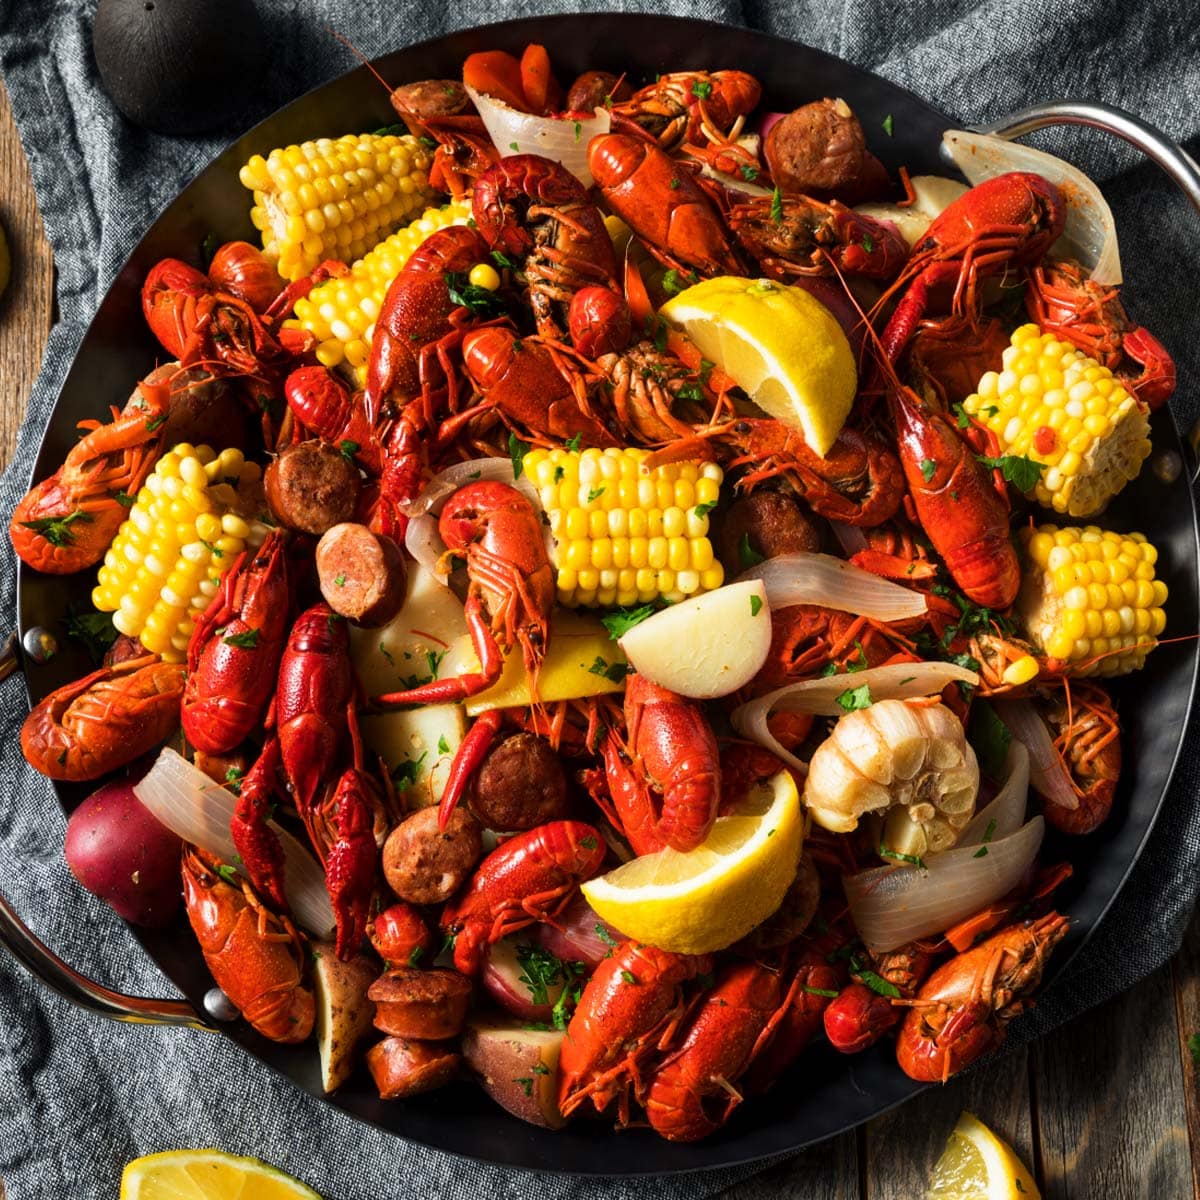 how to reheat seafood boil bag . My favorite reheating method is to put the bag in a pot of boiling water. Reduce the heat to a simmer and let it reheat for about 3-5 minutes or to your liking.